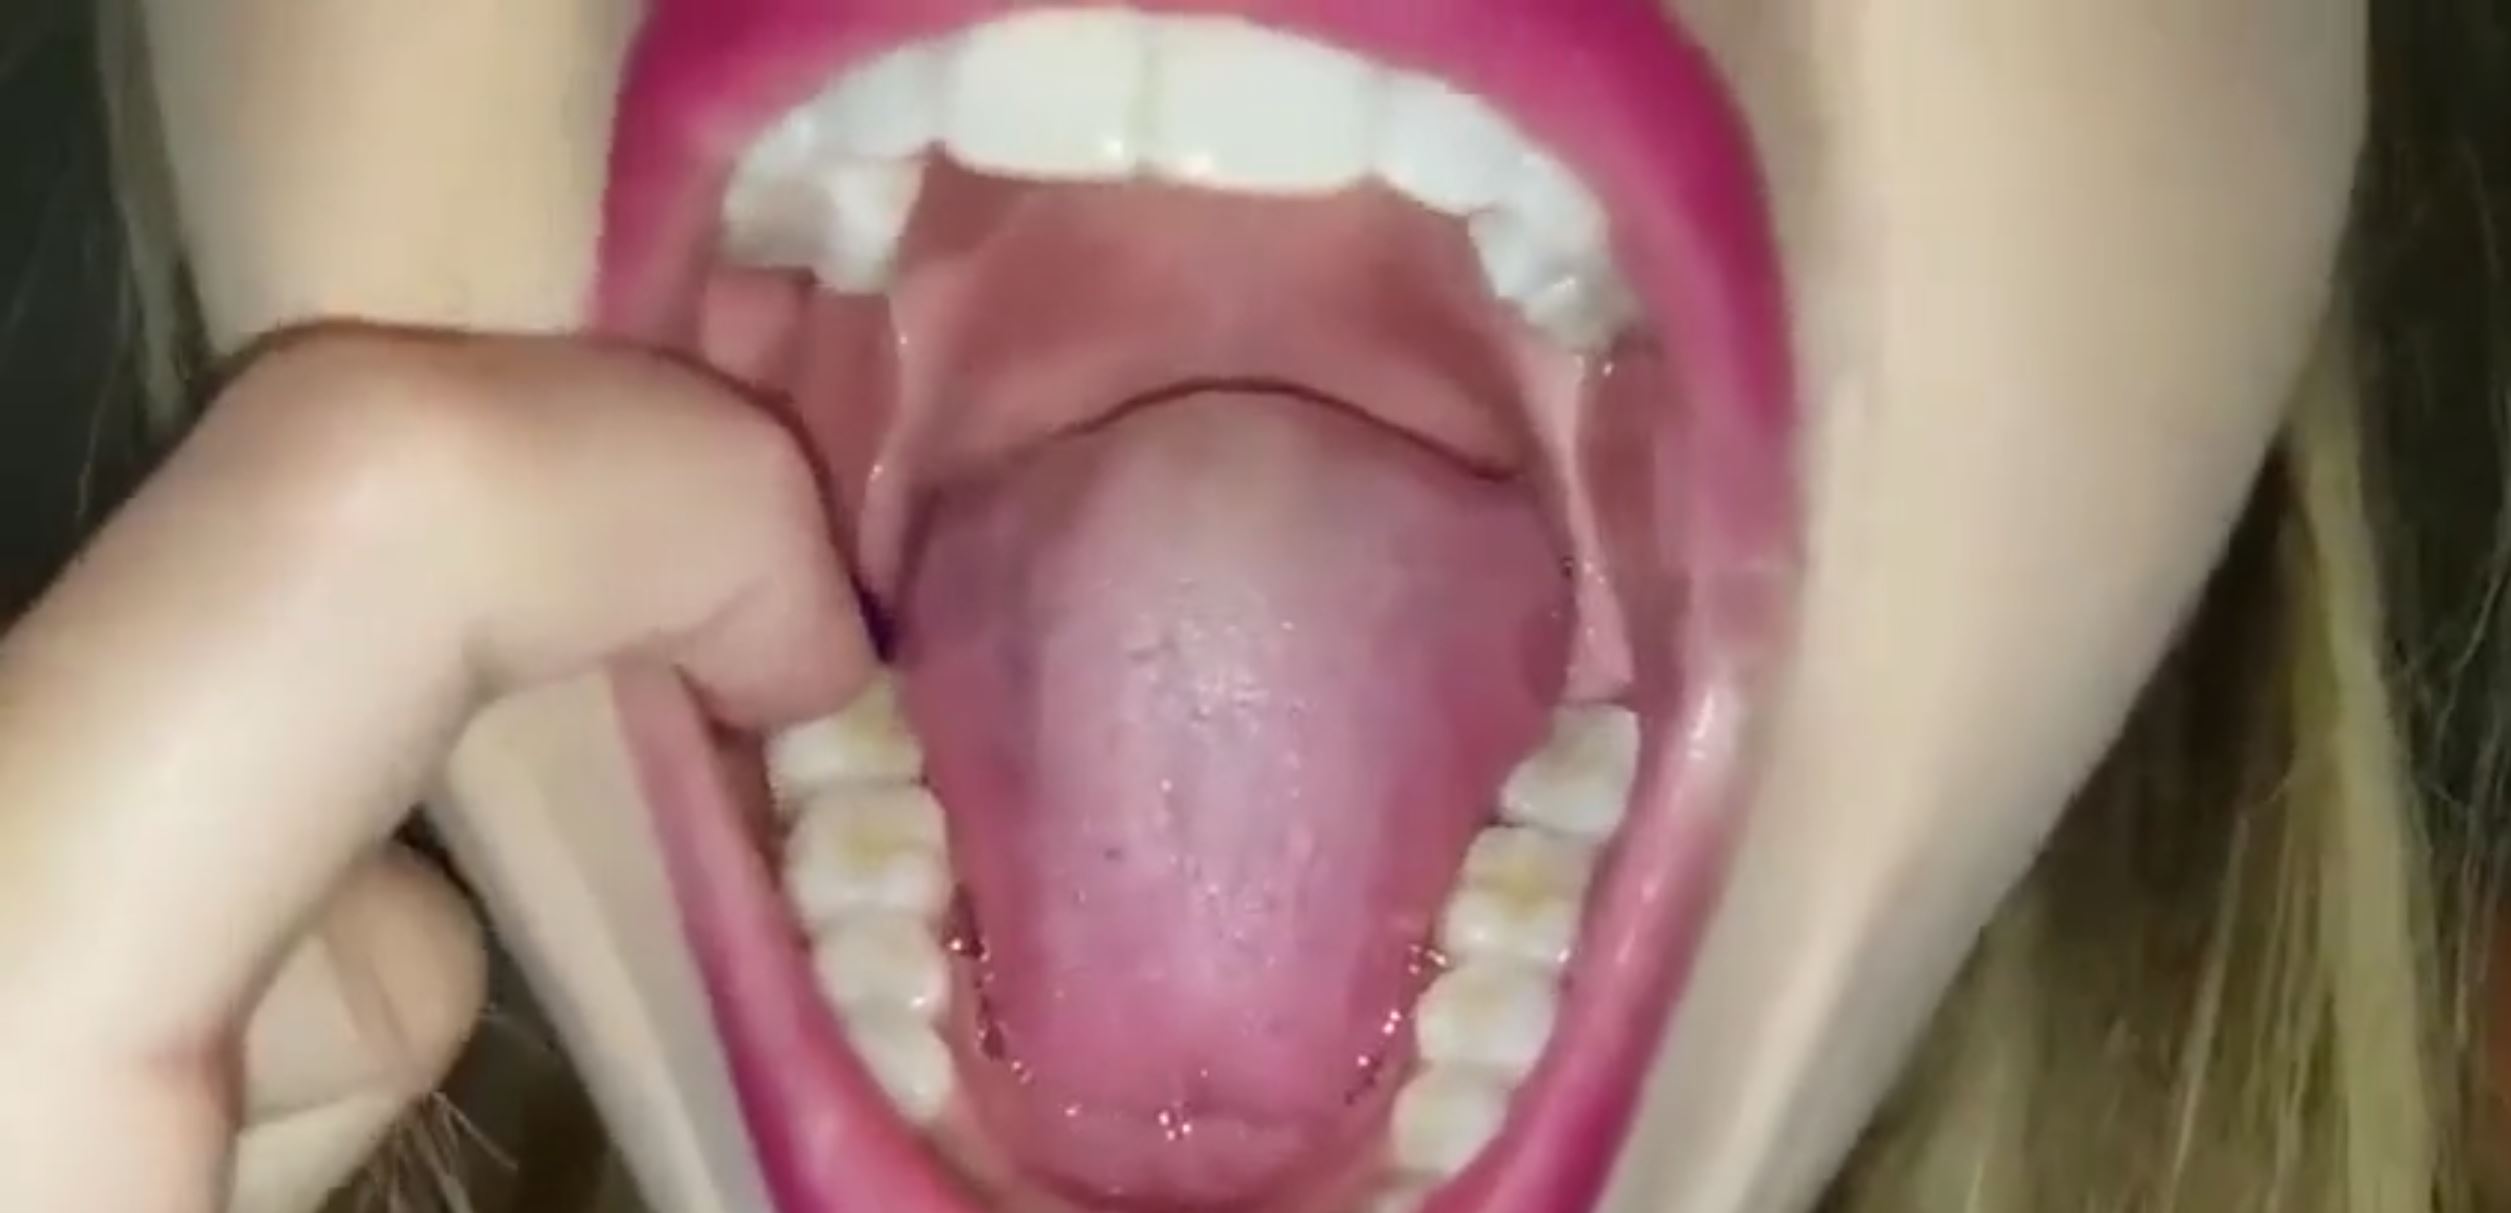 Mouth Video 2 :)